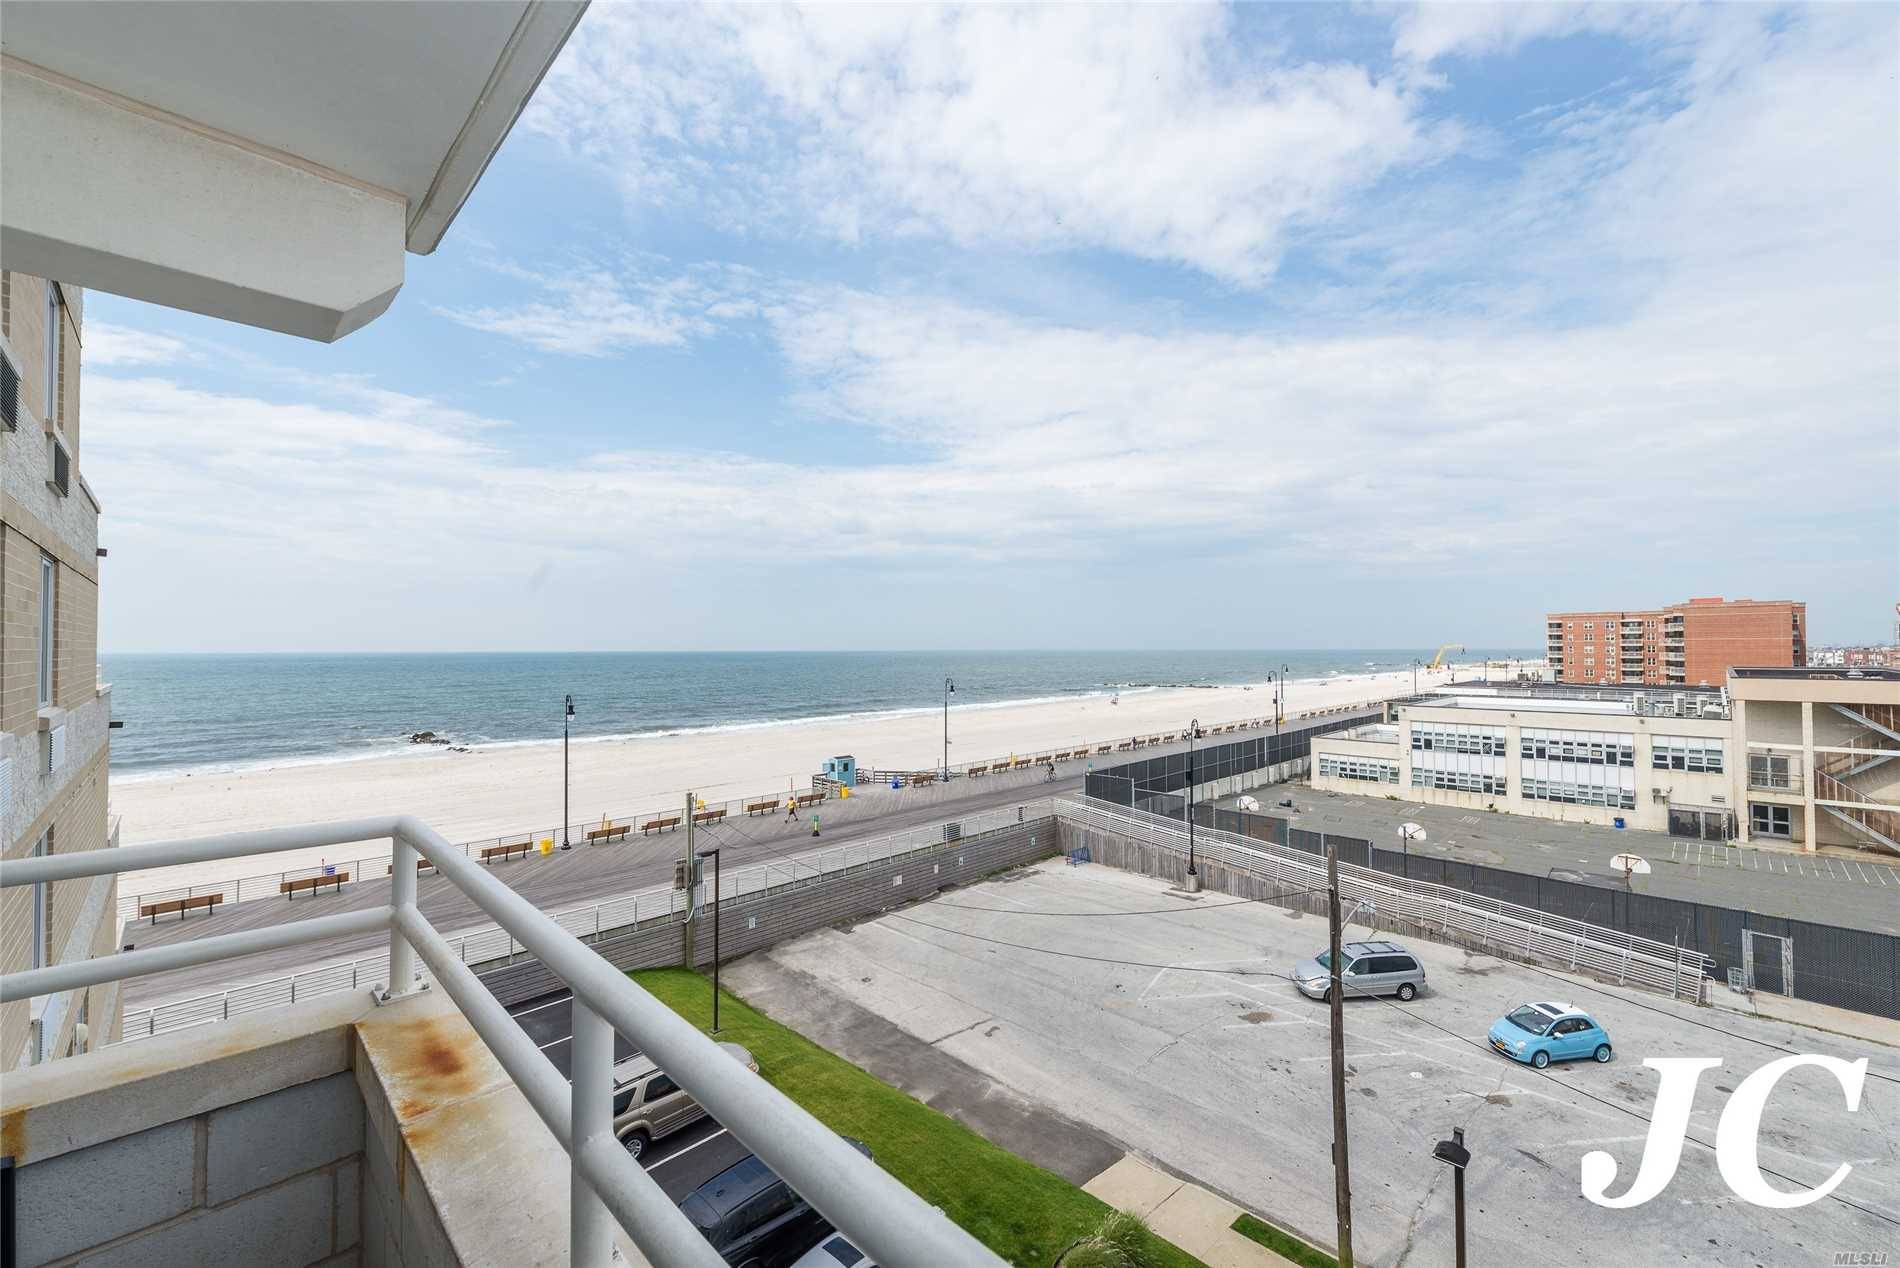 Immaculate Summer Rental In Ocean Front Building W Ocean View, Private Terrace And Parking!